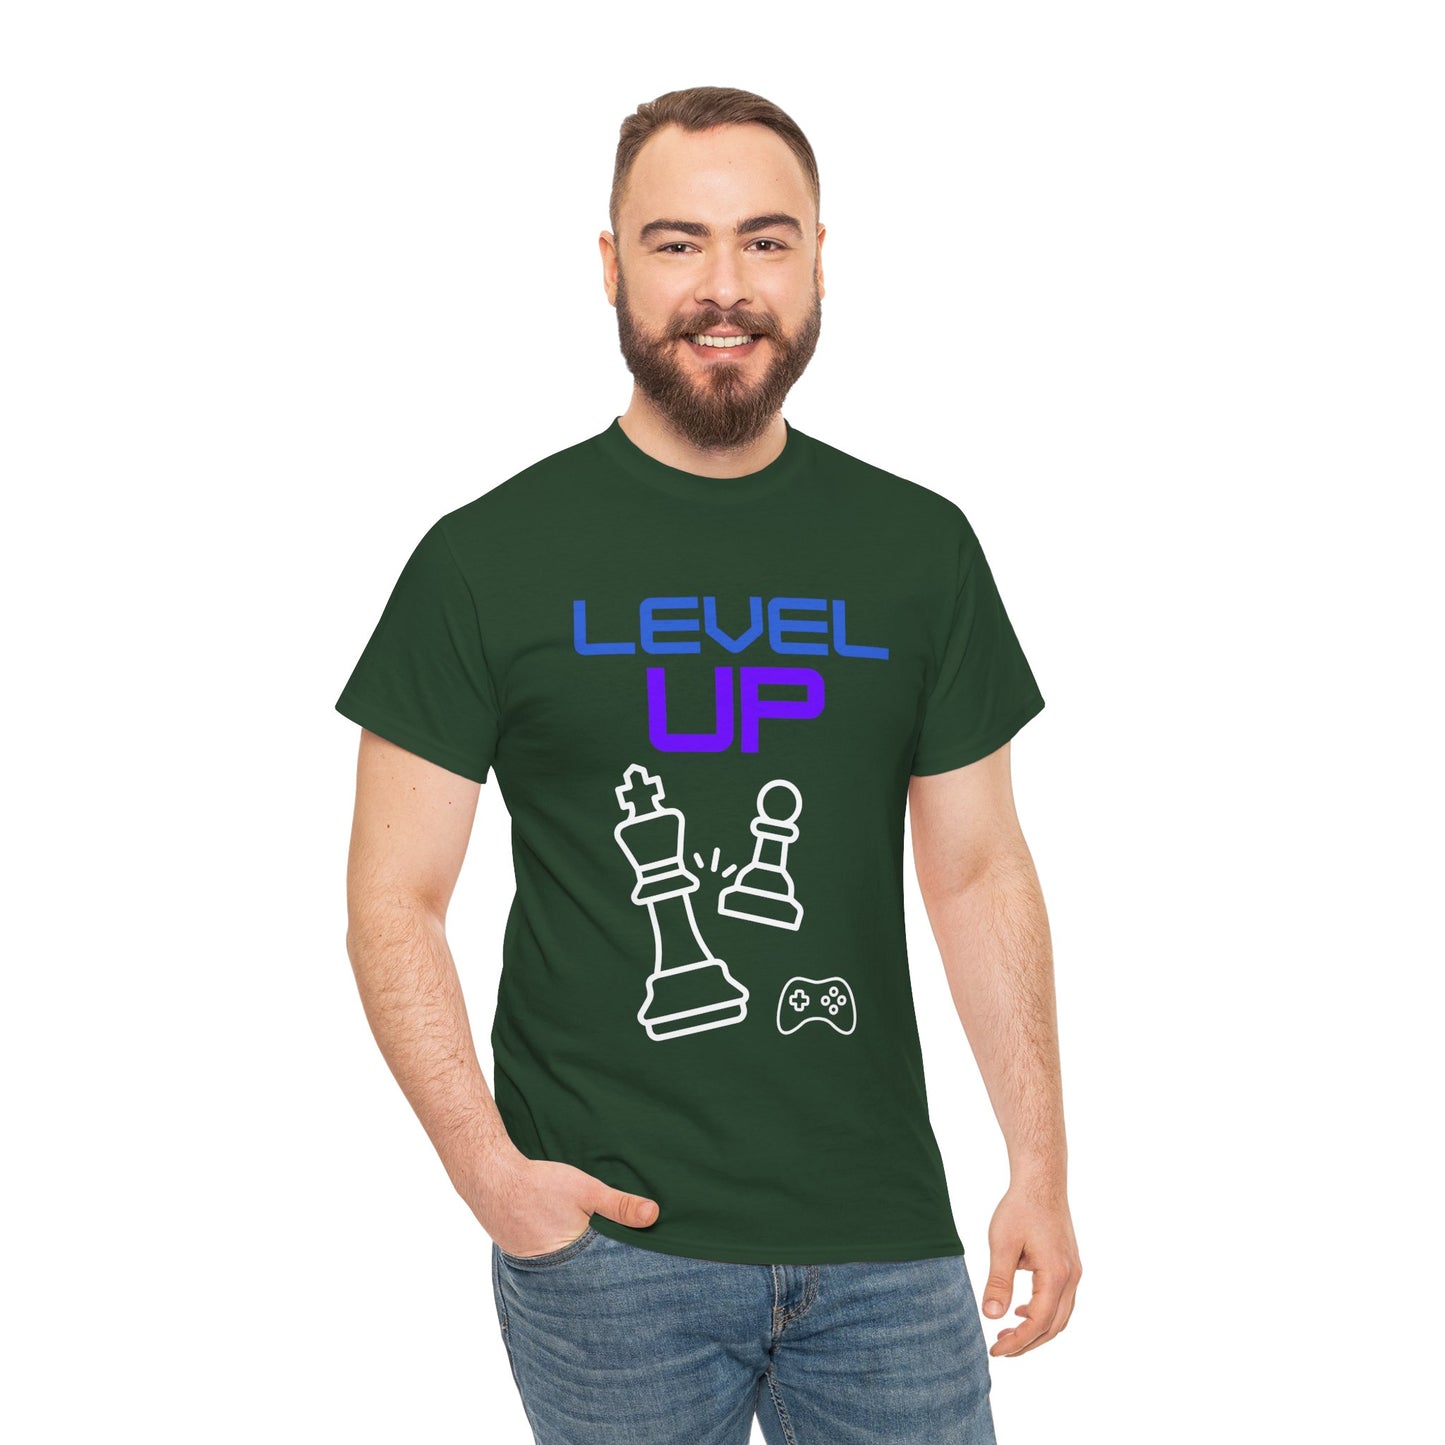 Level Up T-Shirt, Gamer Tee 100% Cotton, 3 Colours, AUS - USA - CAN warehouse, free post.